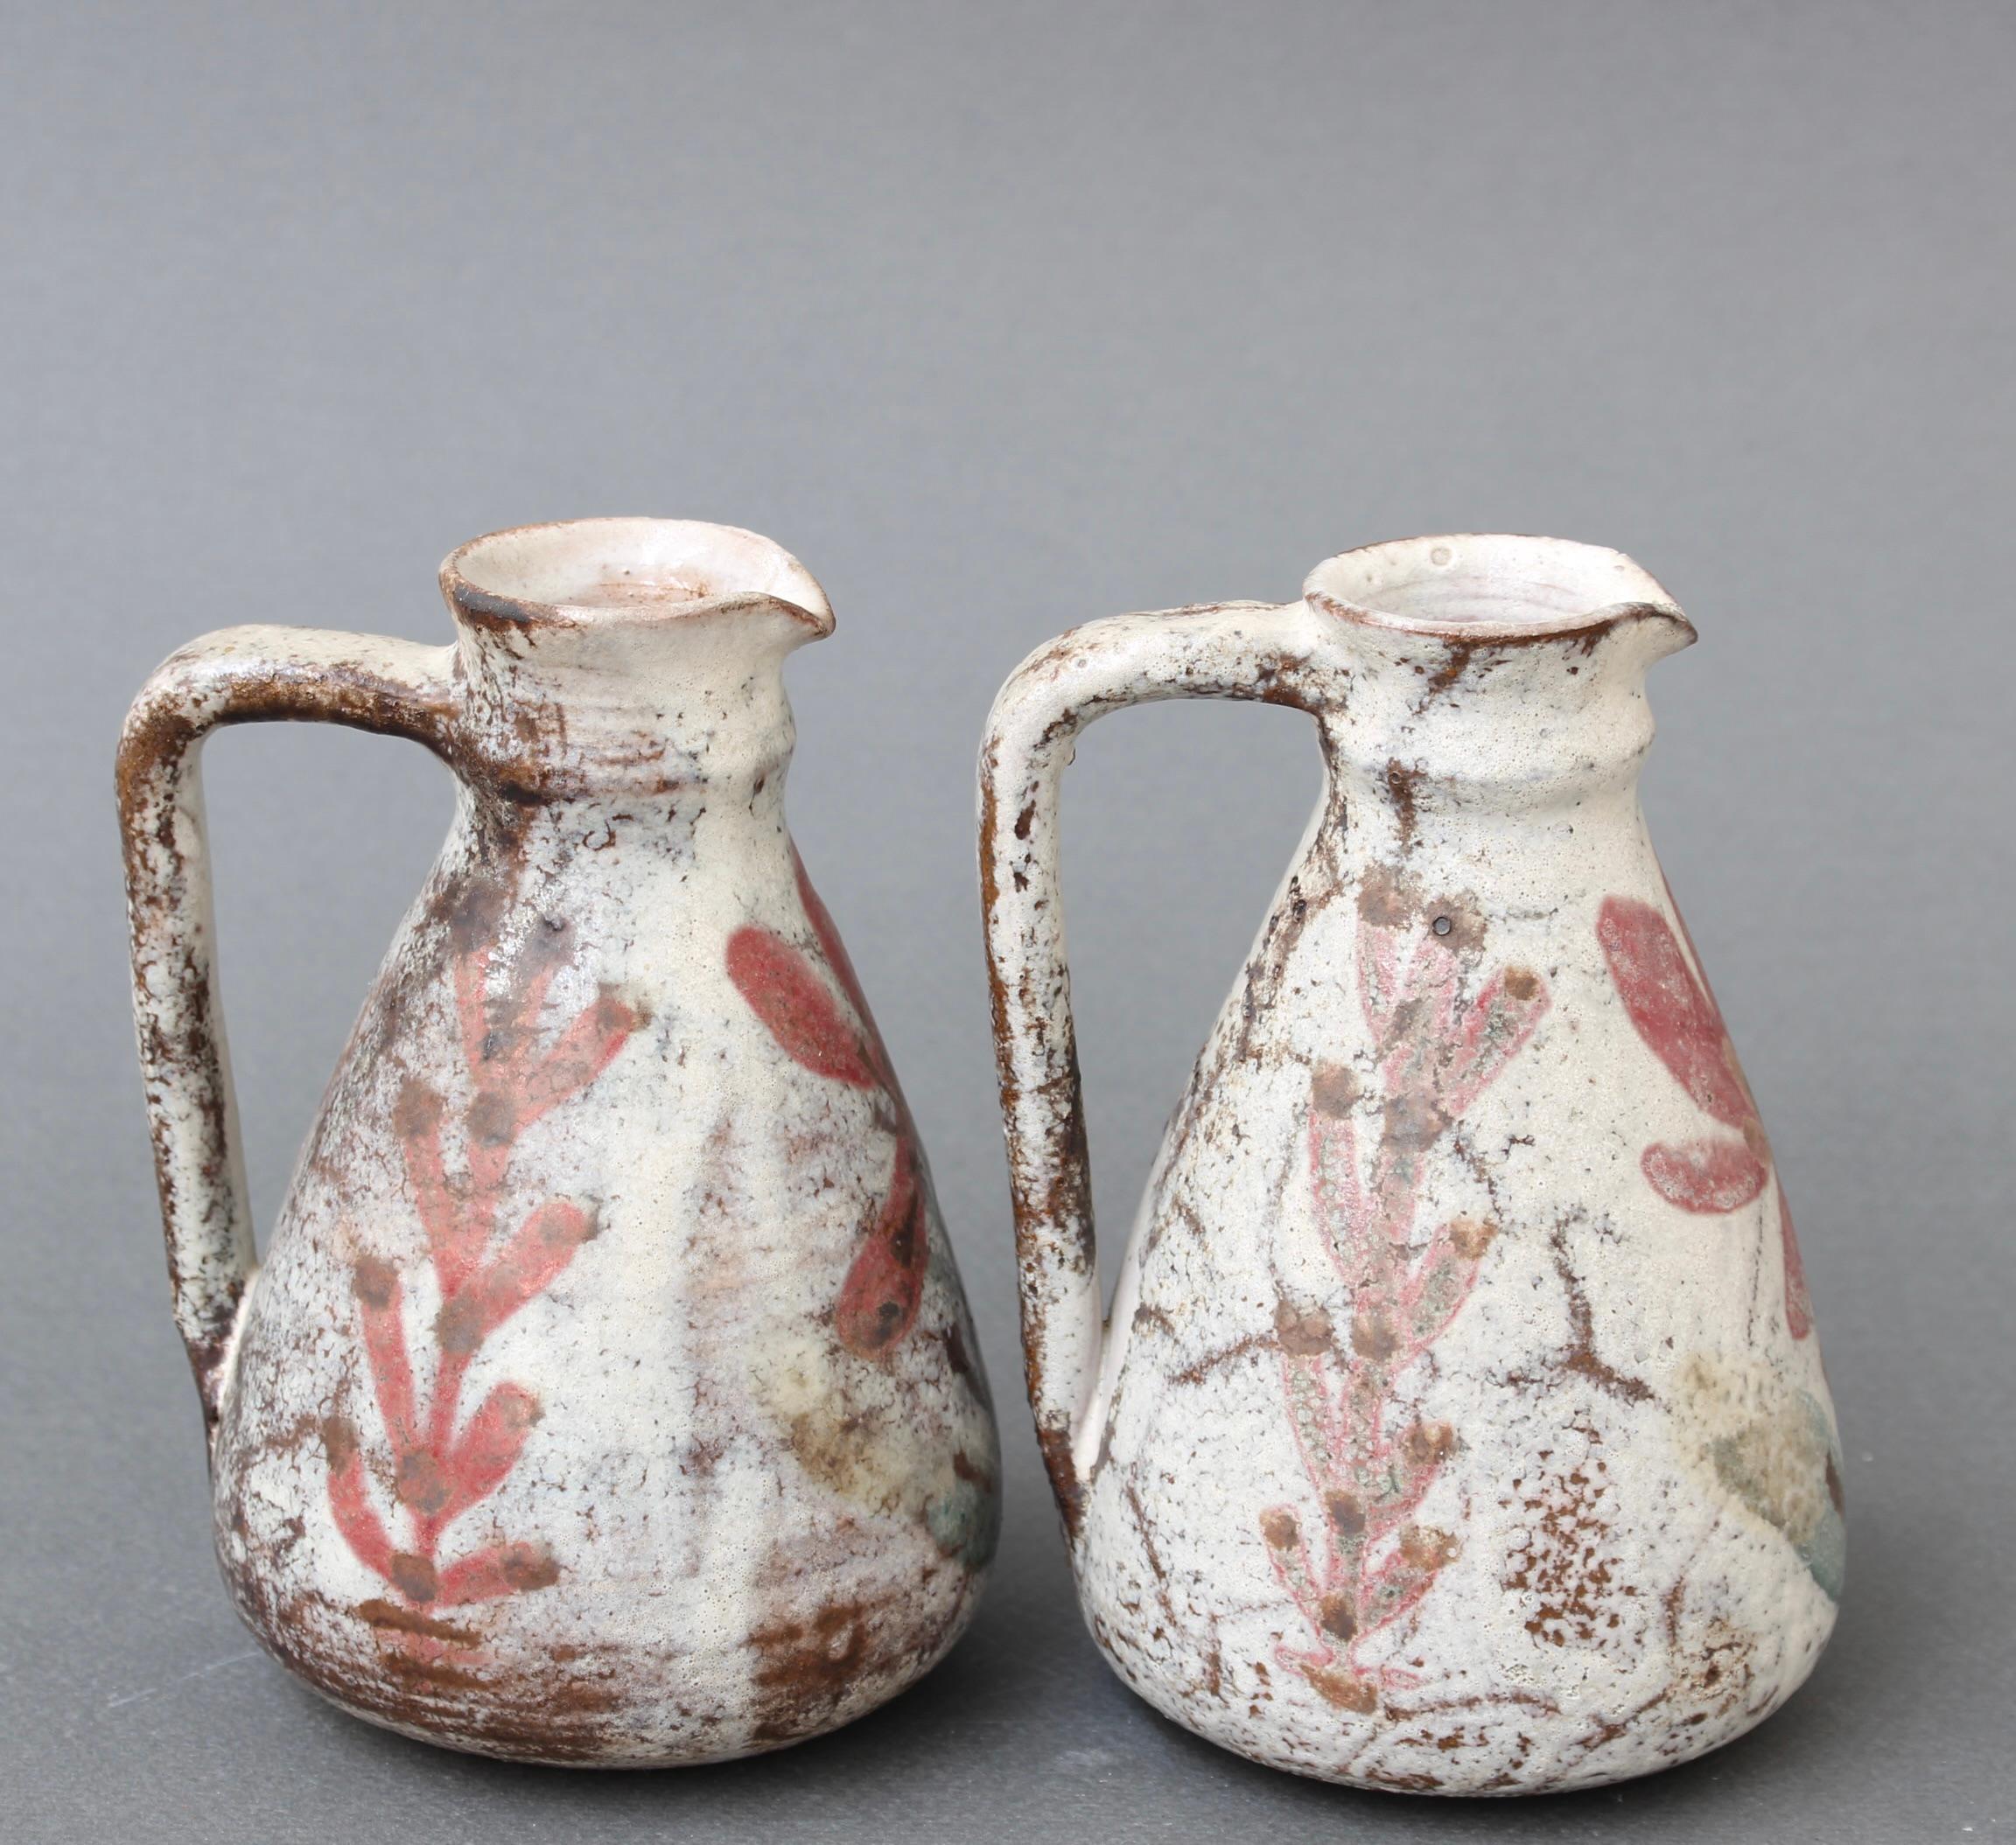 Pair of French Decorative Ceramic Vessels with Handle and Spout - Small In Good Condition For Sale In London, GB